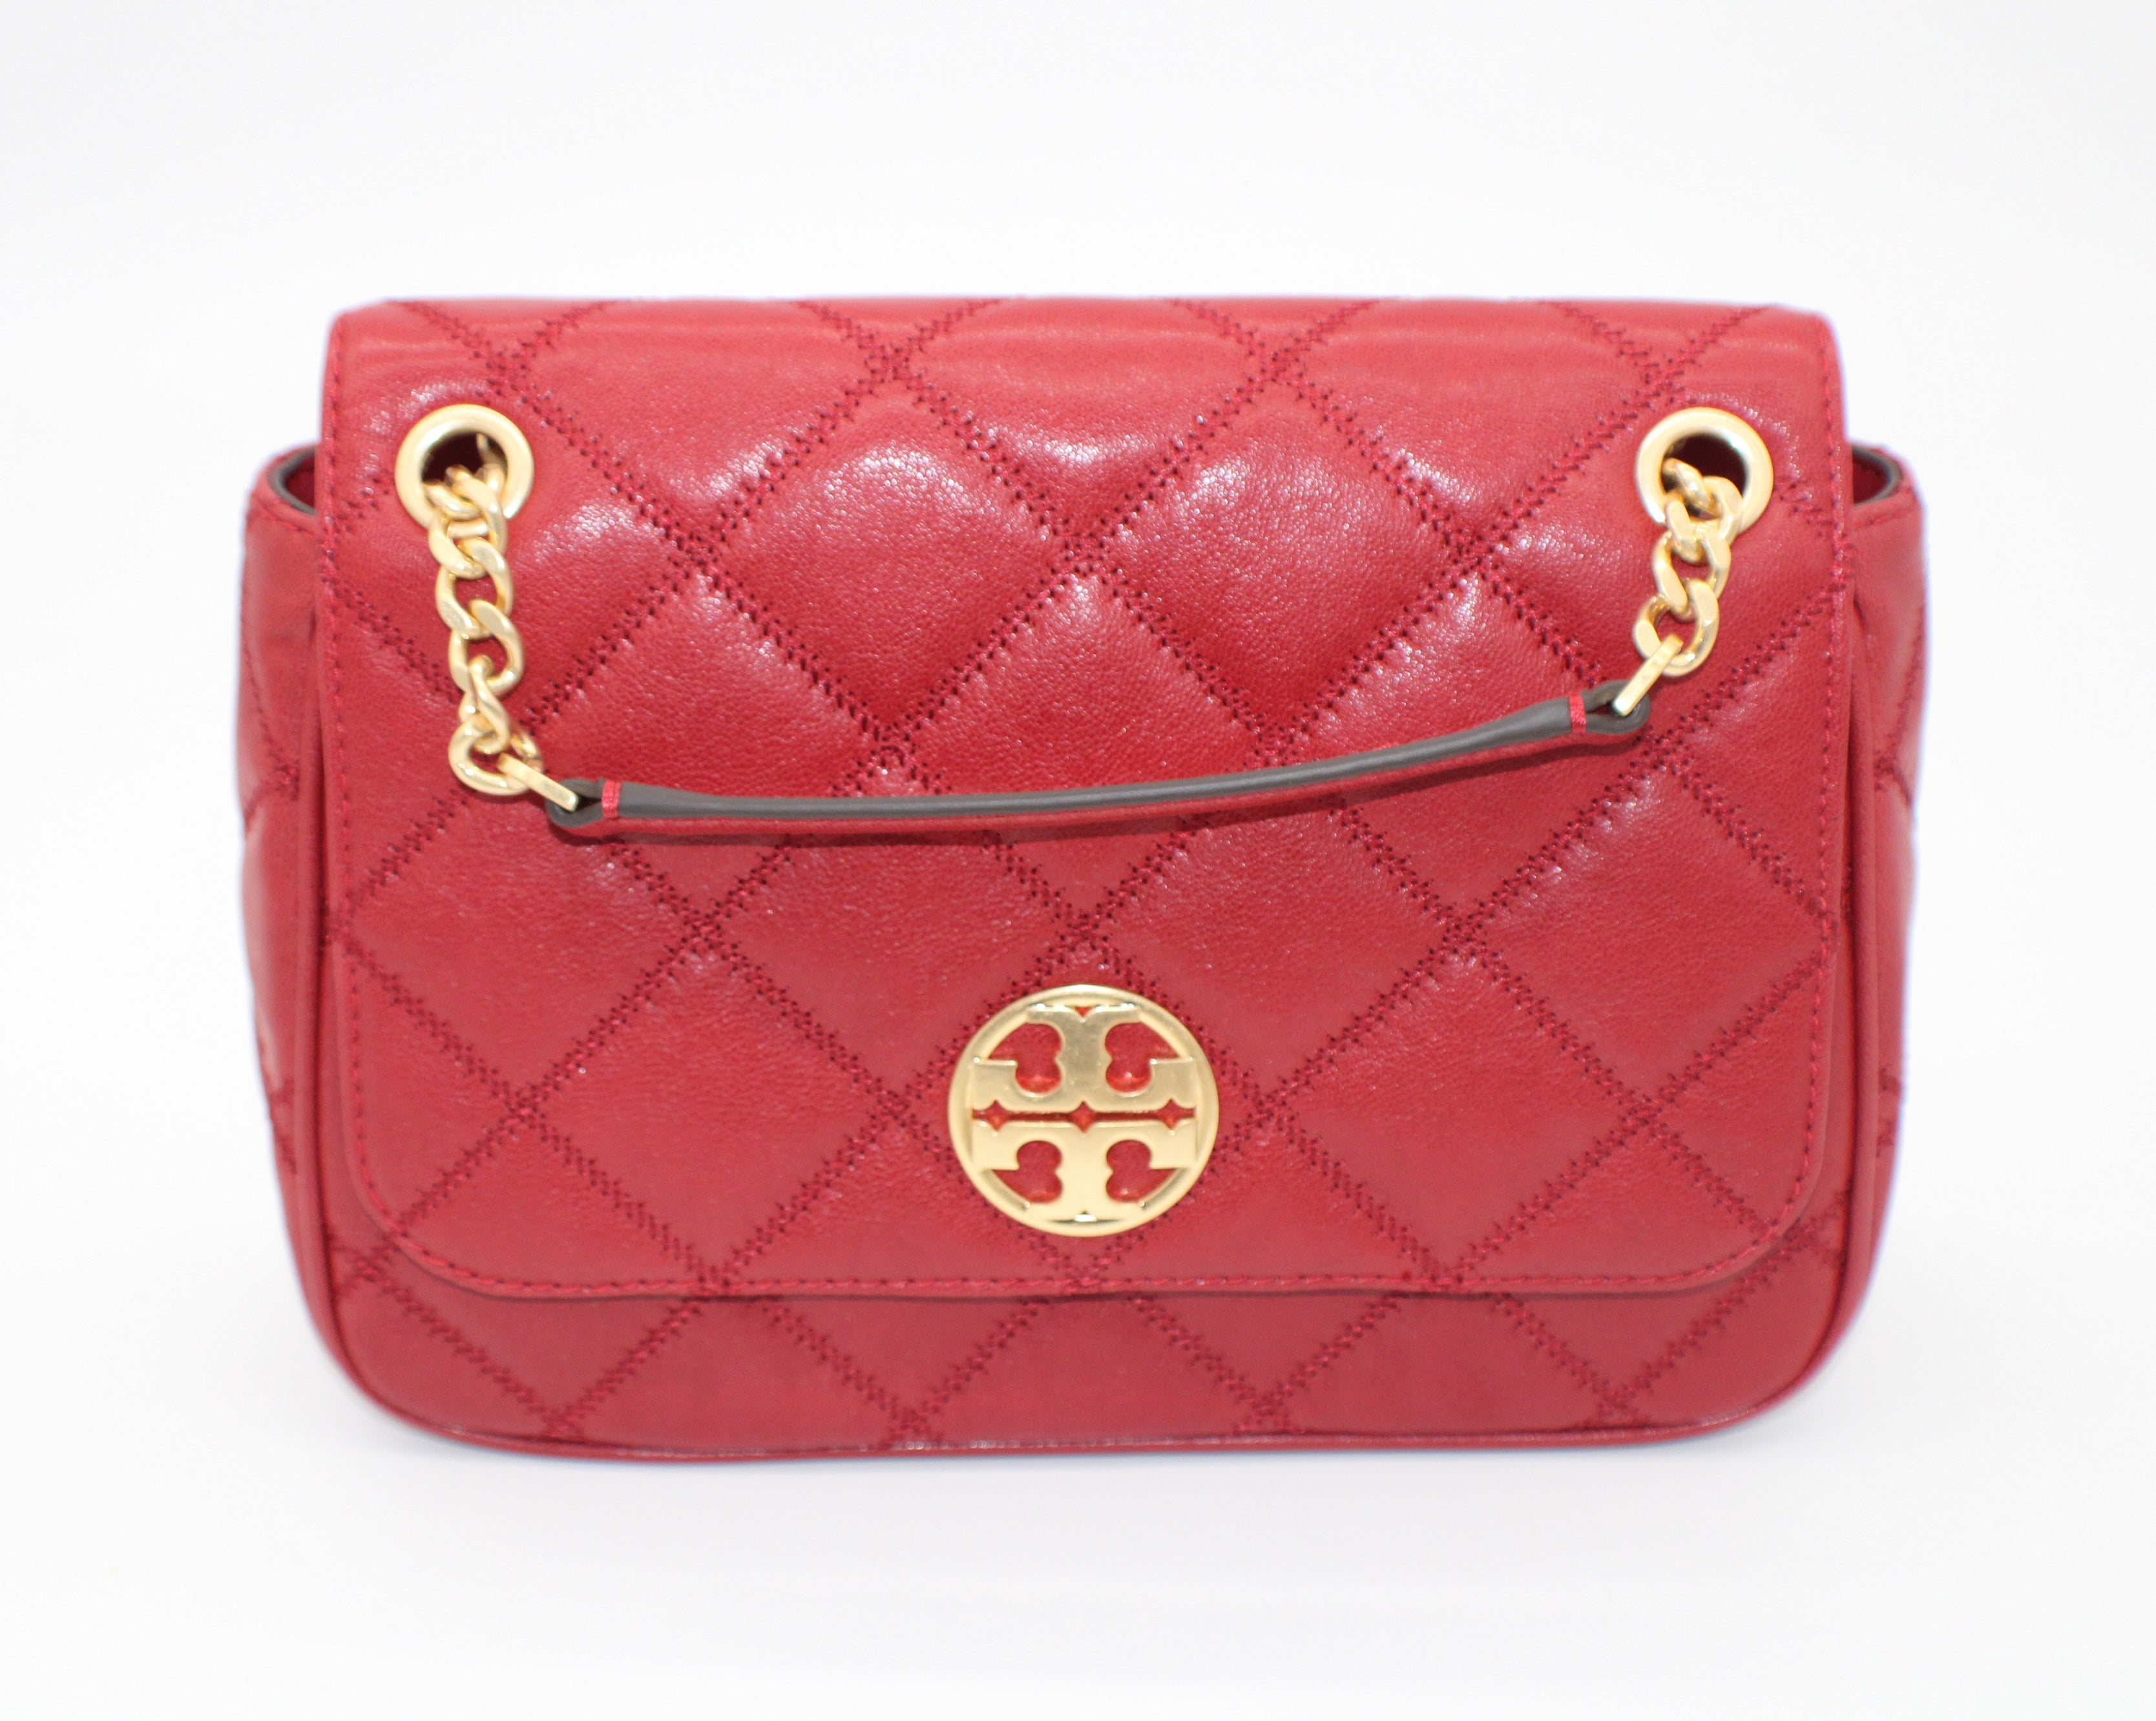 Tory Burch Metallic Pink Quilted Leather Flap Crossbody Bag Tory